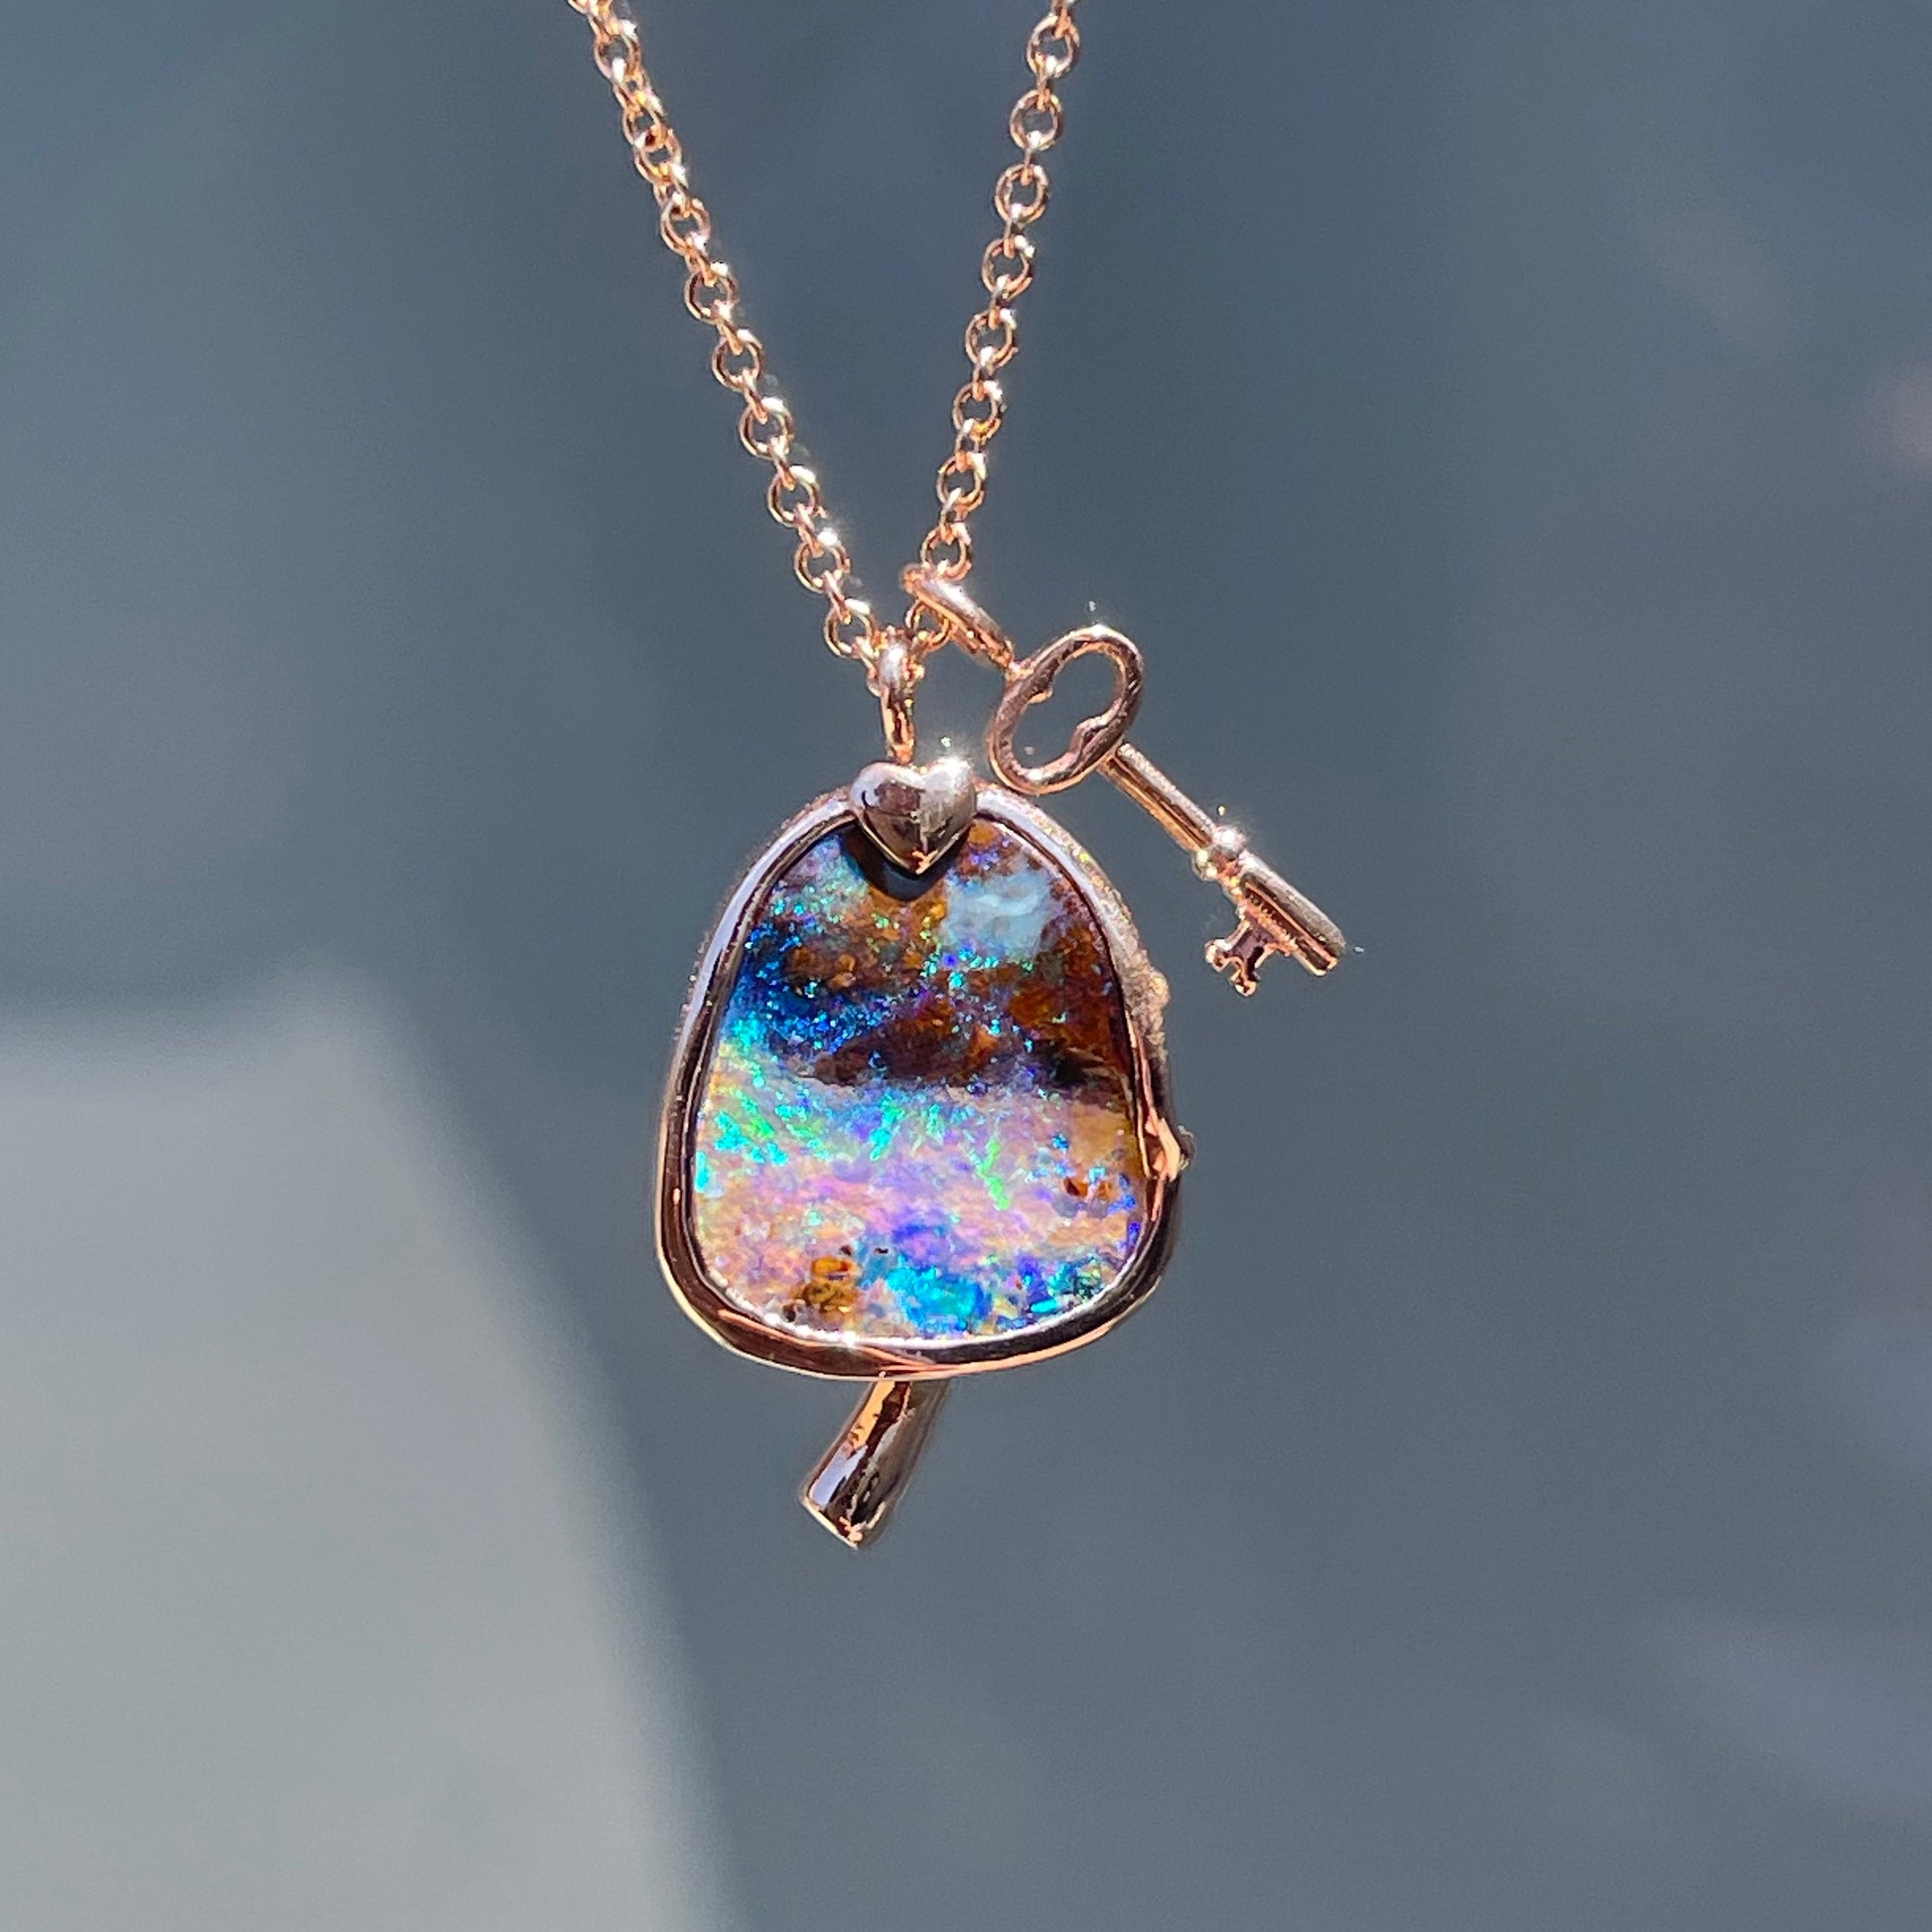 An Australian Opal Necklace by NIXIN Jewelry in 14k rose gold with a Boulder Opal.